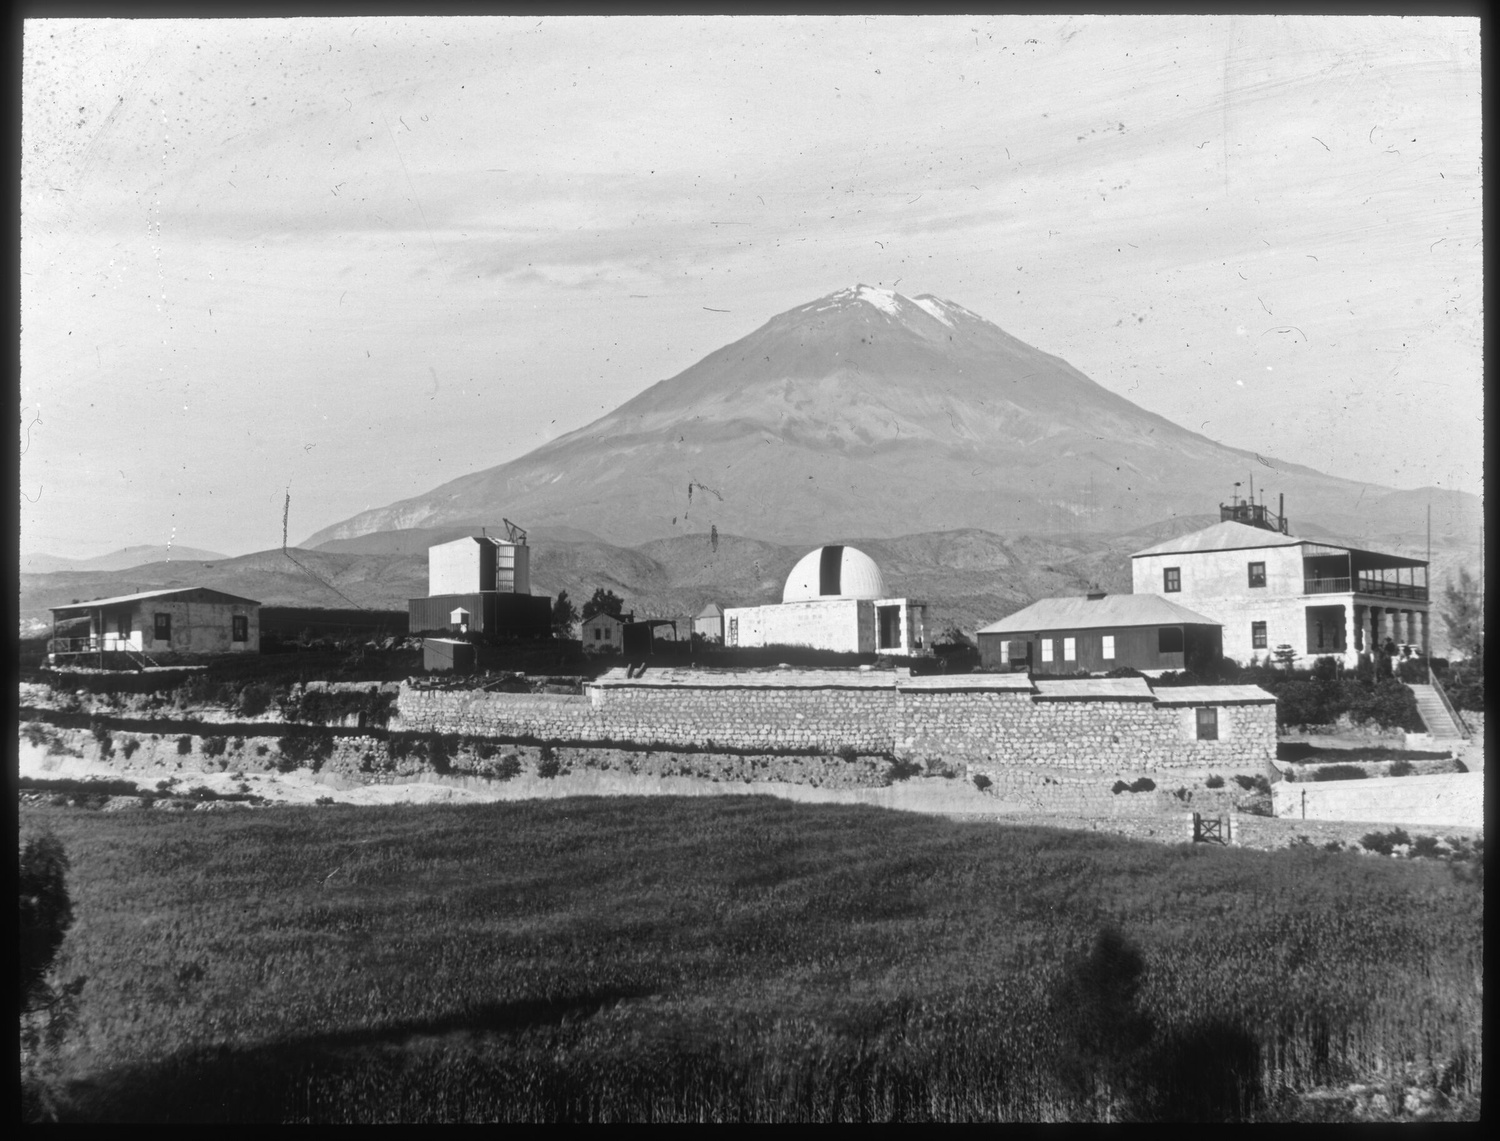 The Arequipa Station with El Misti in the background.